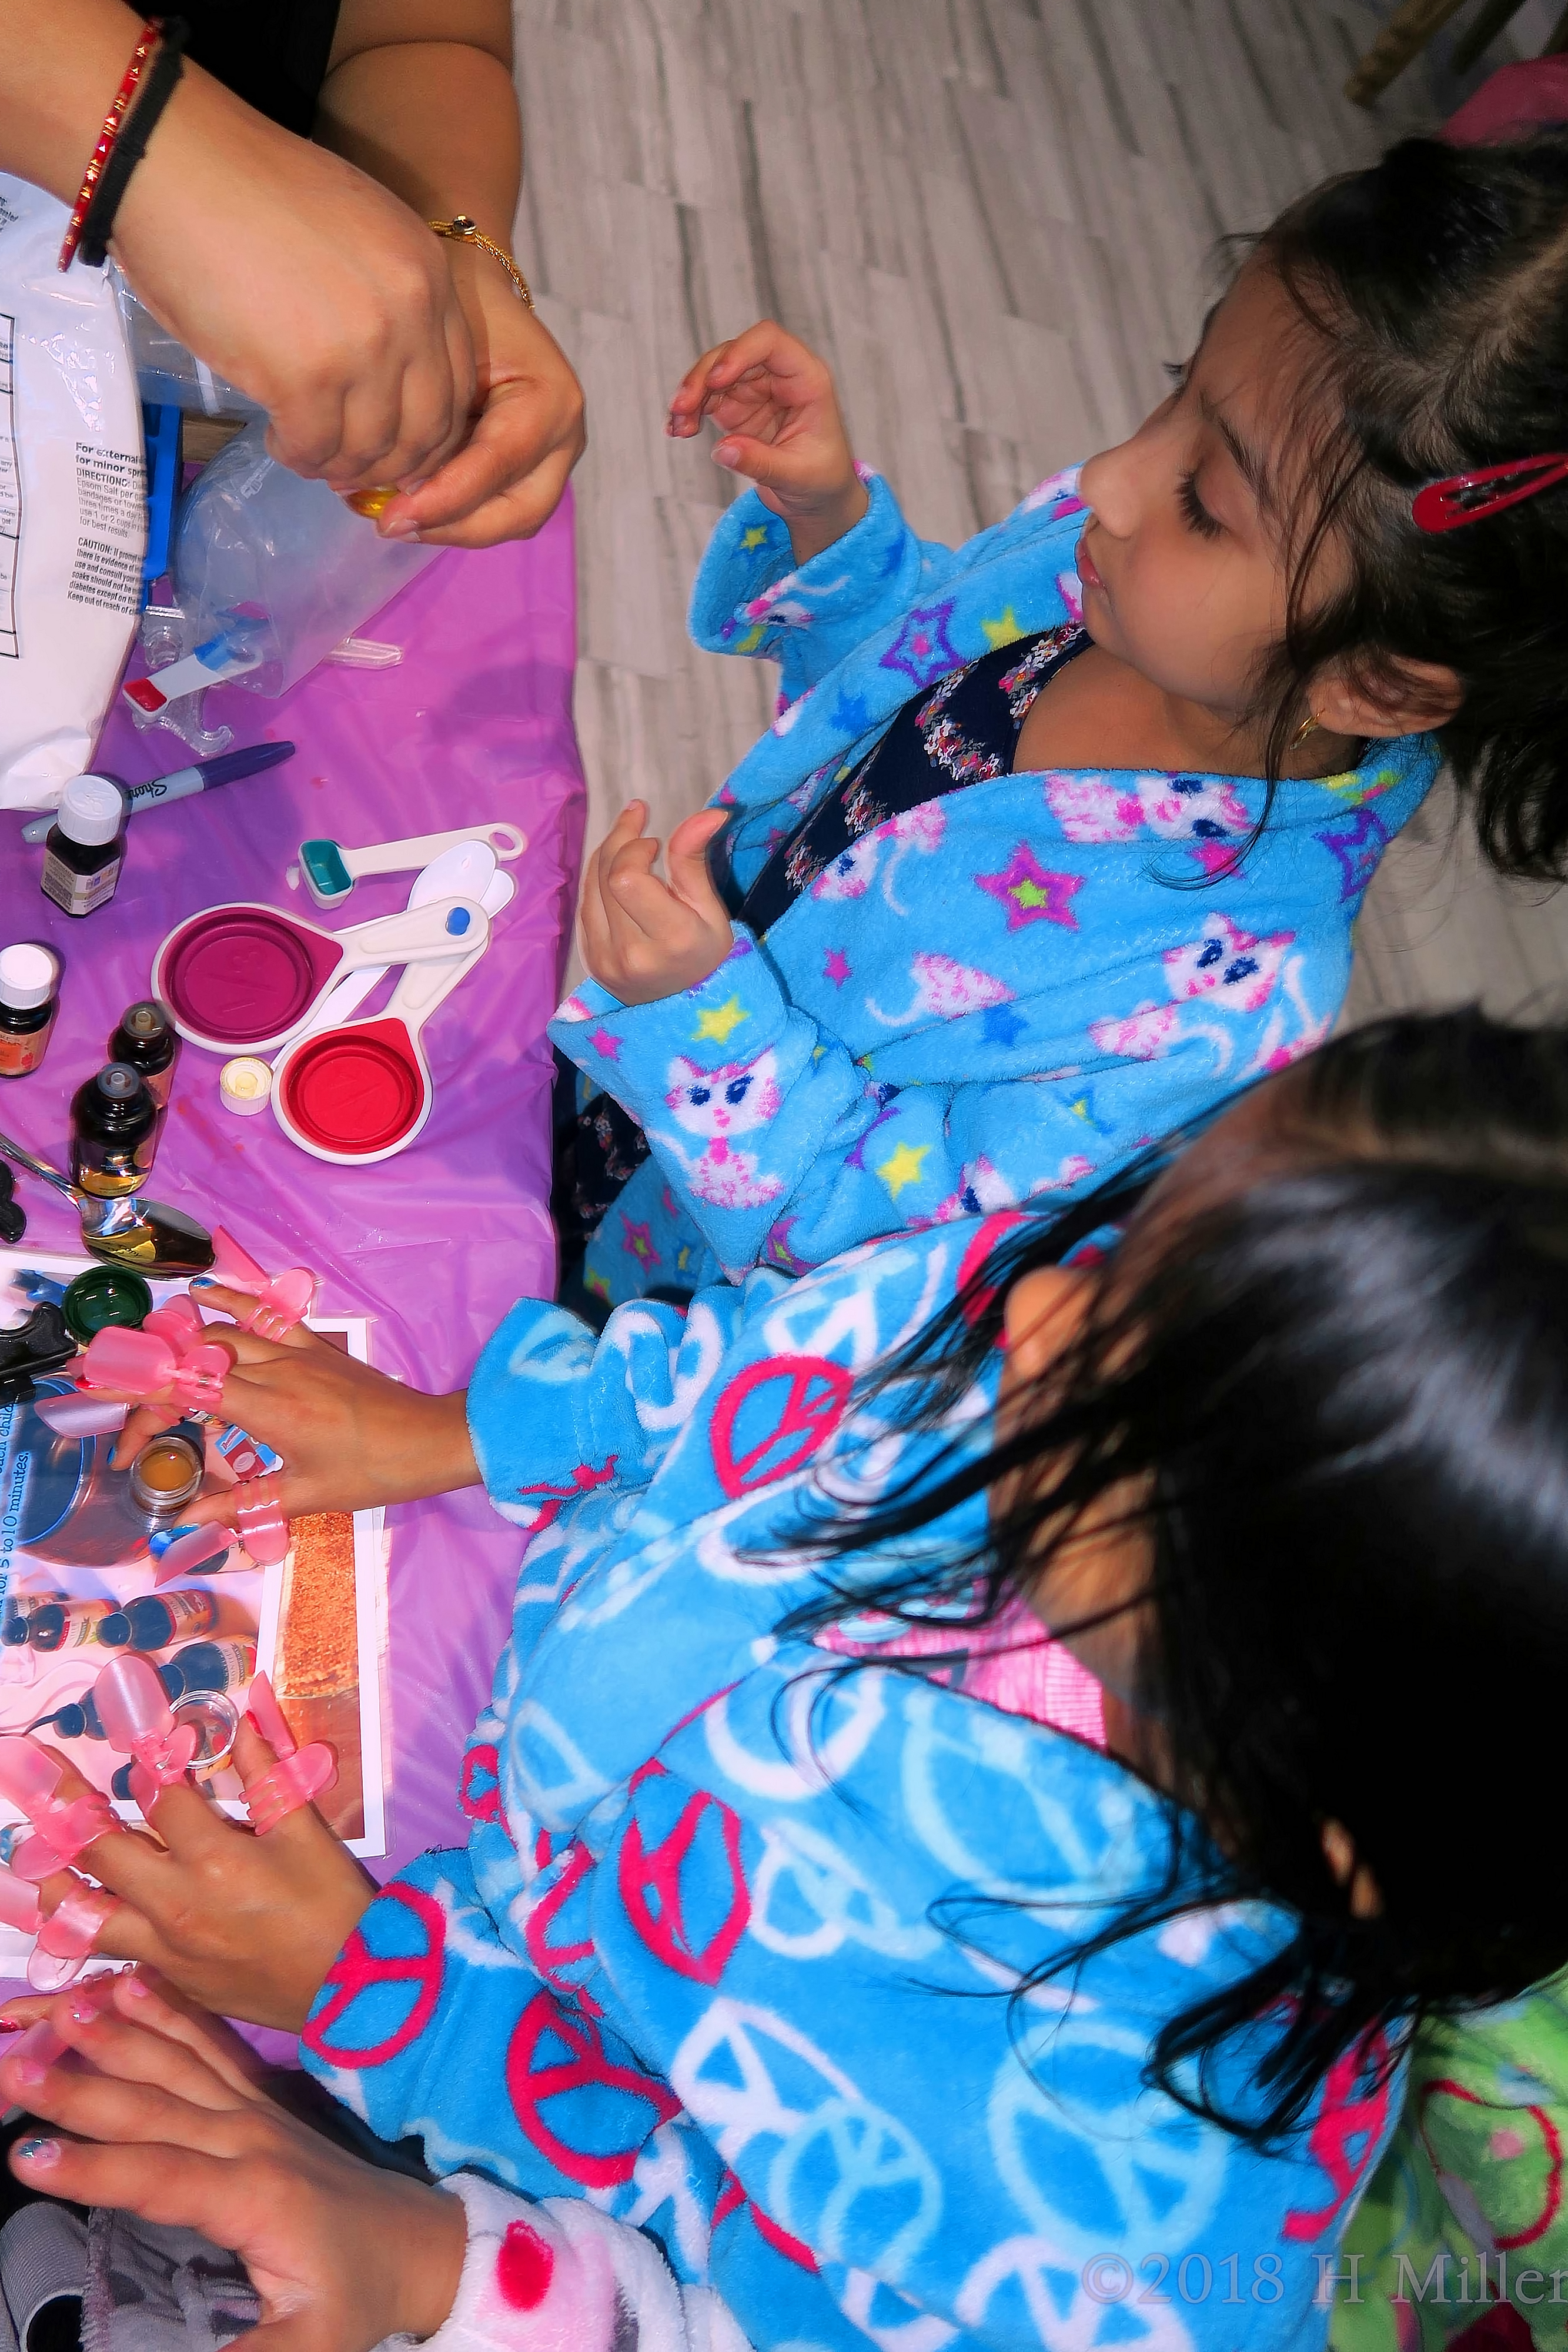 Little Party Goers Enjoy Making Kids Crafts While Their Girls Manicures Dry